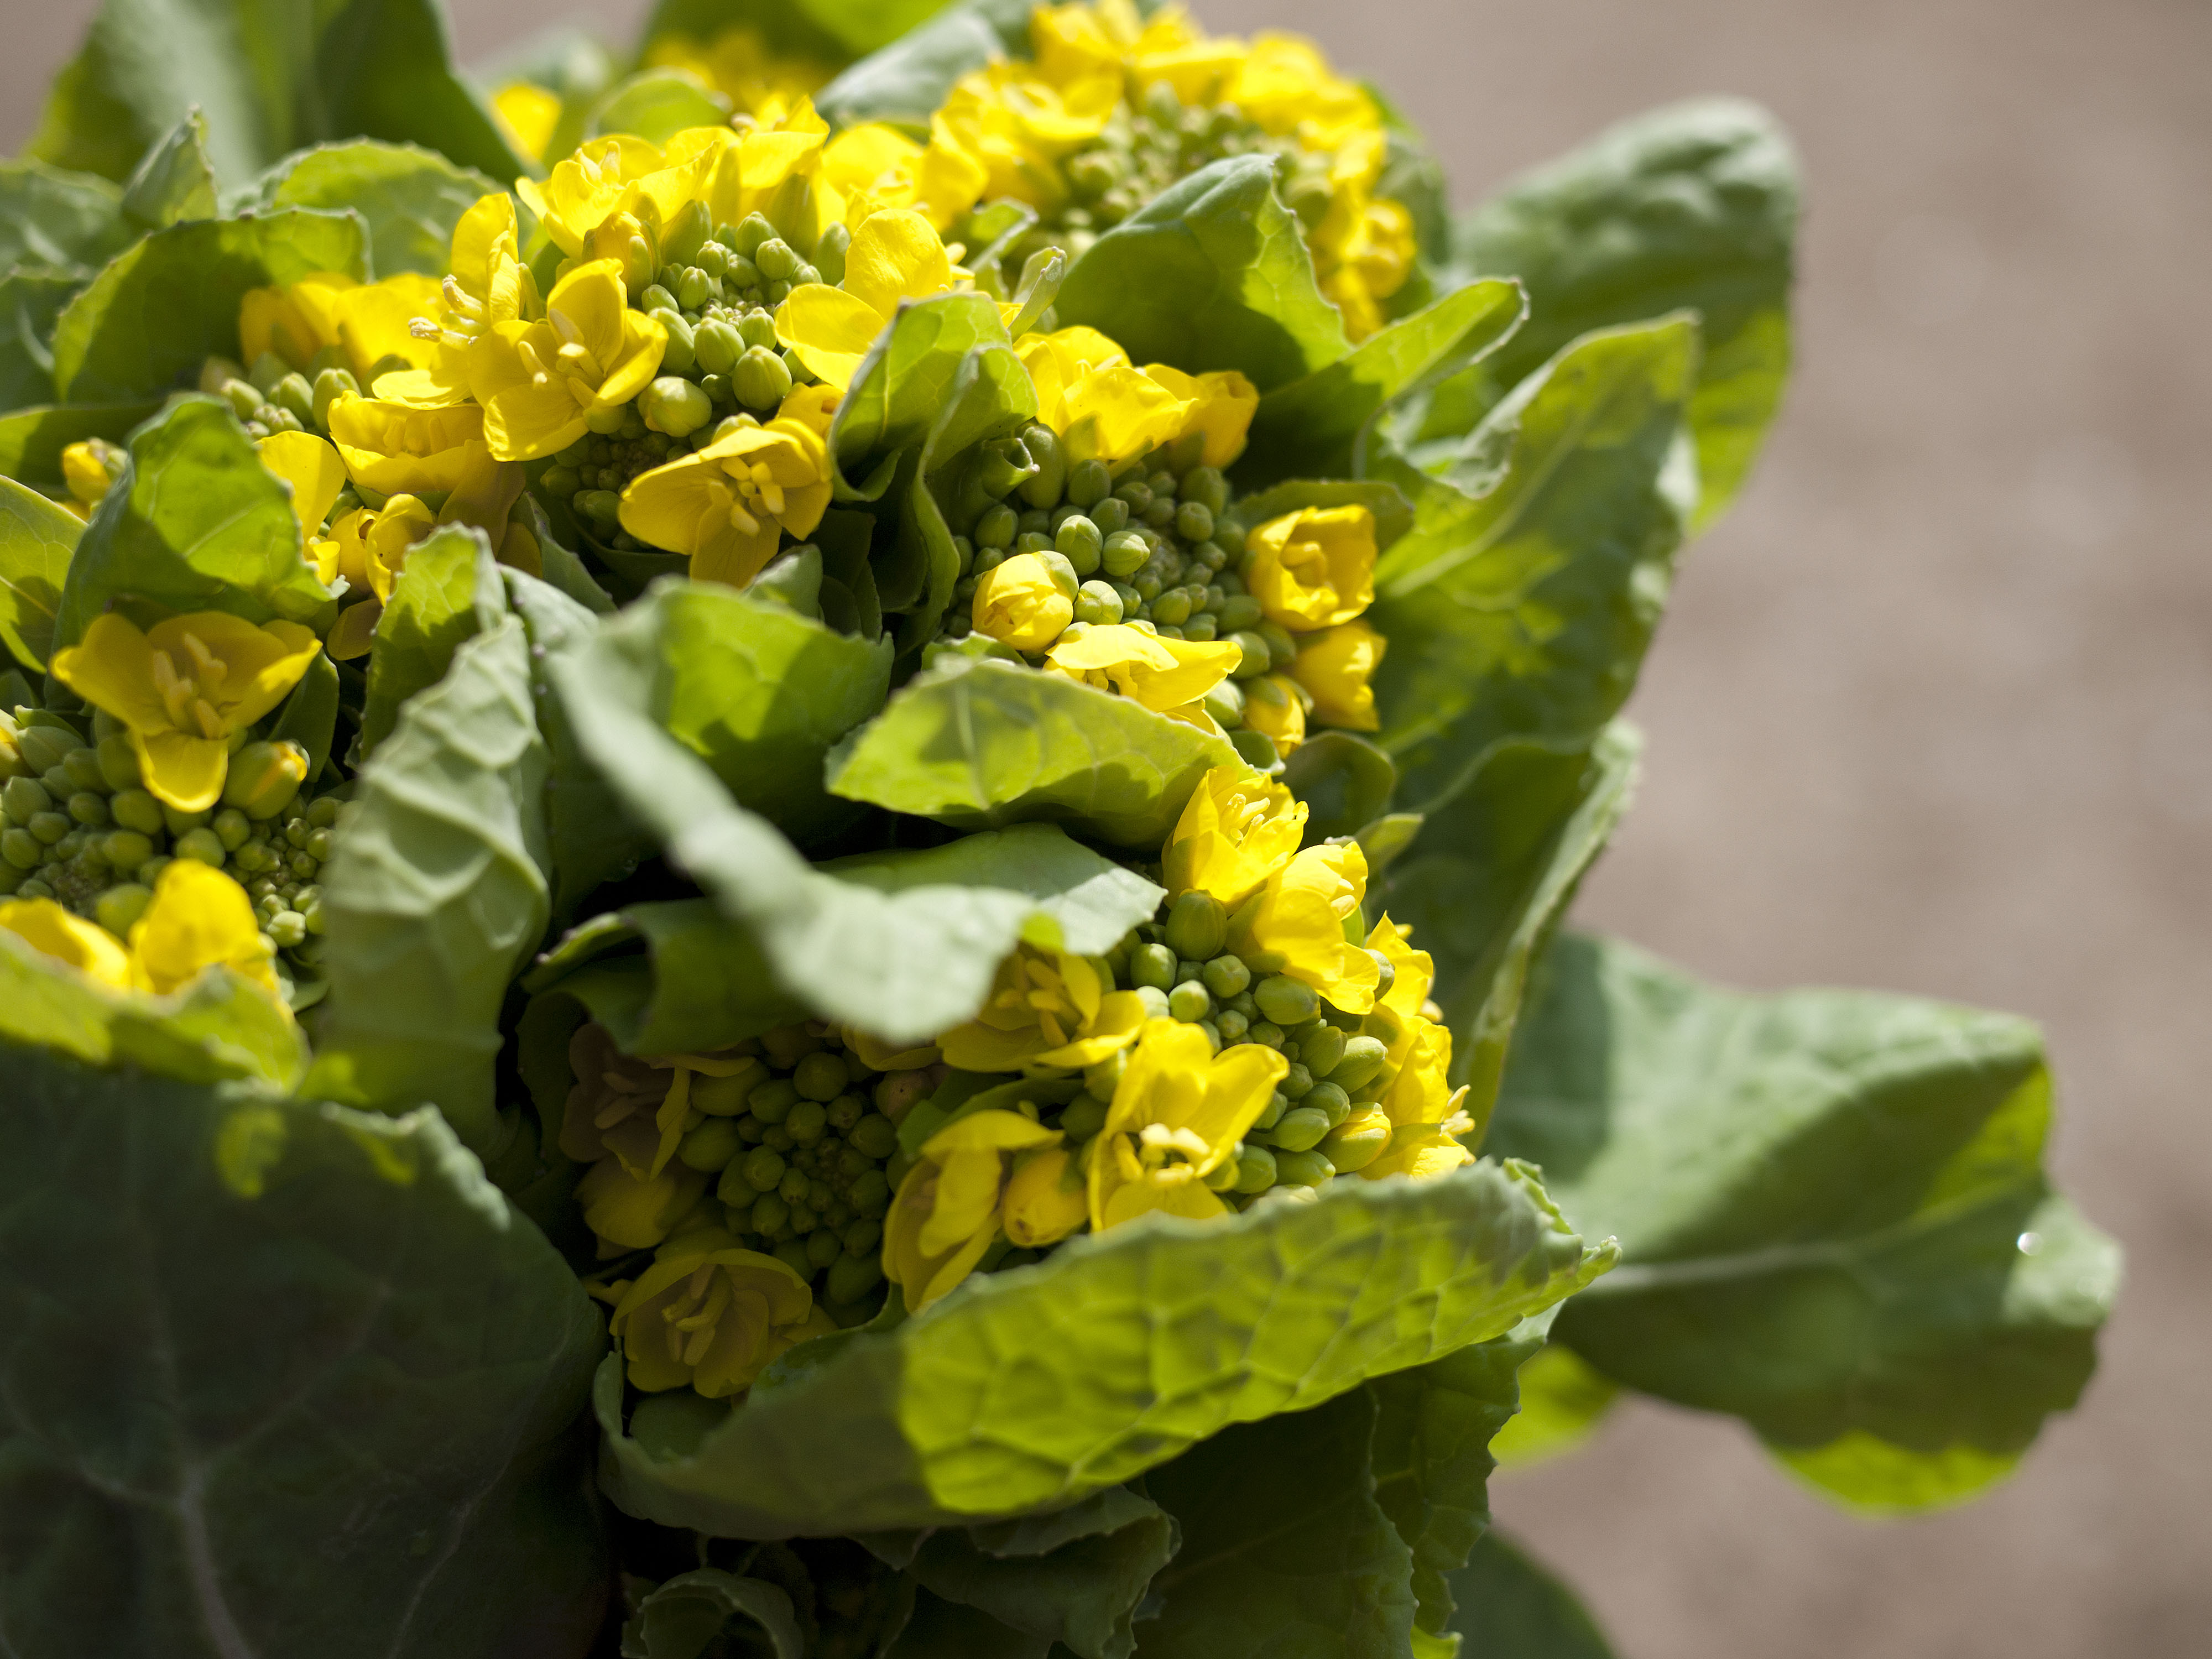 Vernal treasure: Closely related to broccoli, nanohana is best eaten in spring, when its buds are yellow-green. | MAKIKO ITOH